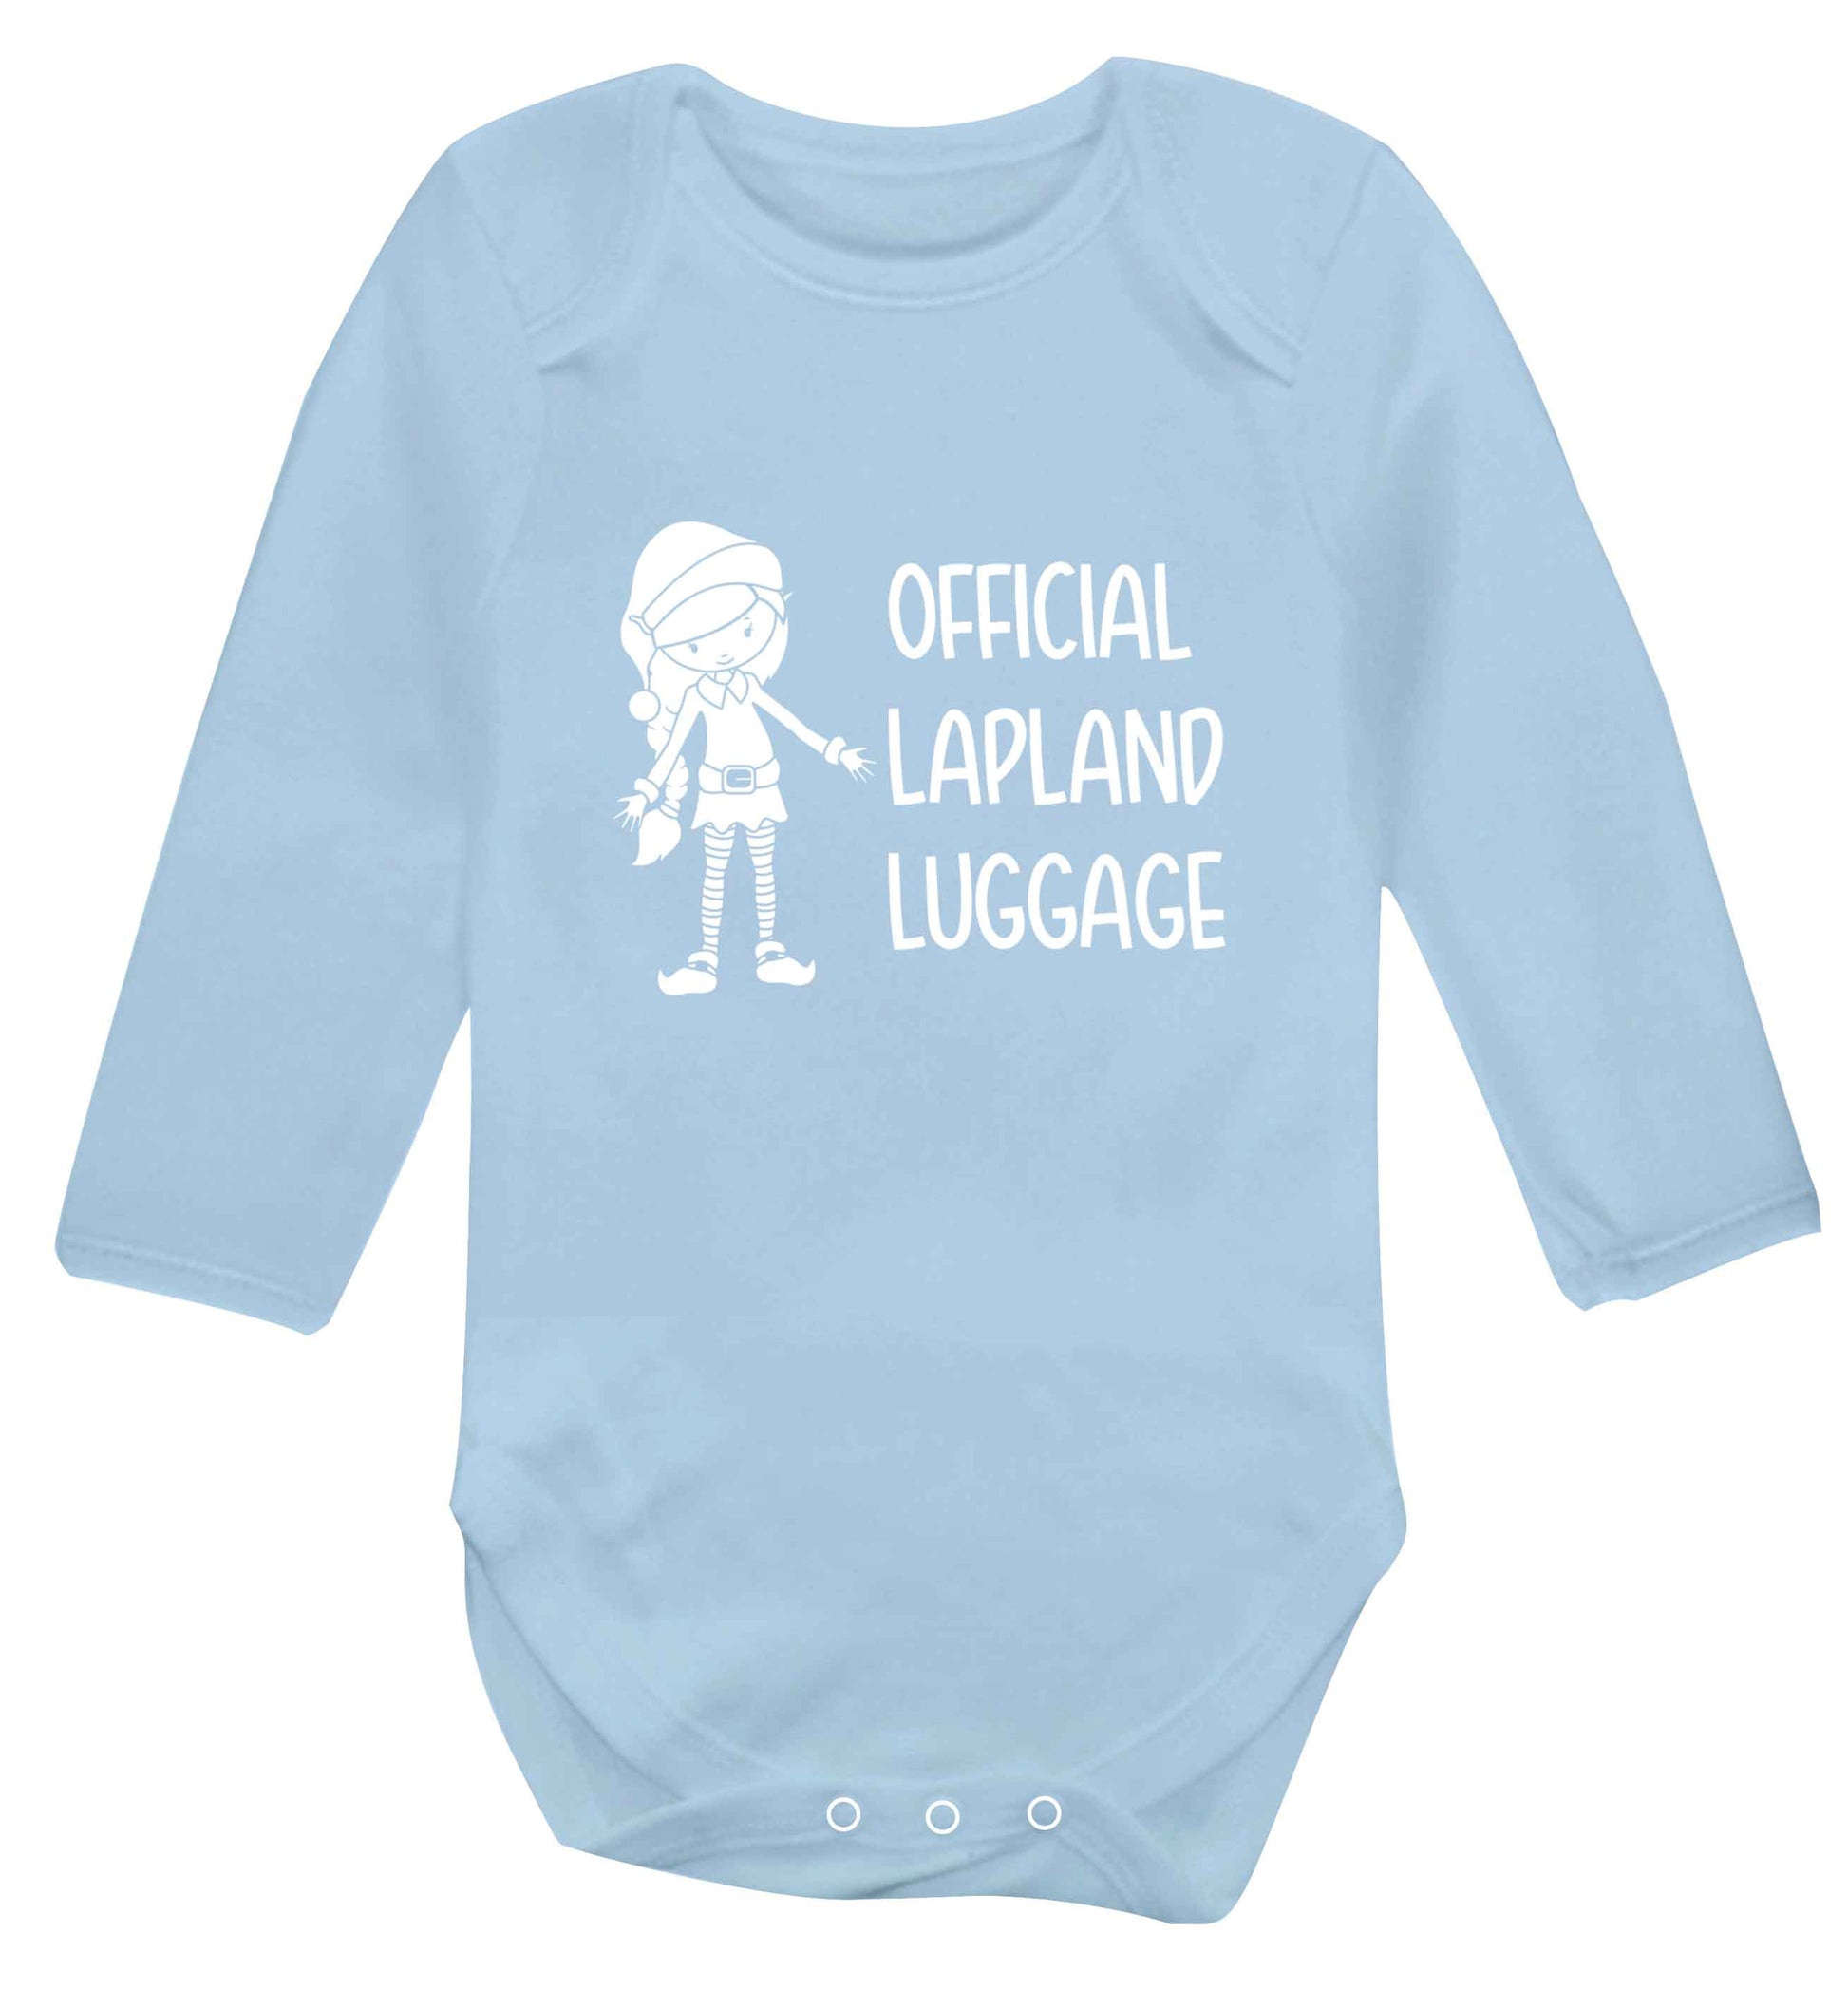 Official lapland luggage - Elf snowflake baby vest long sleeved pale blue 6-12 months